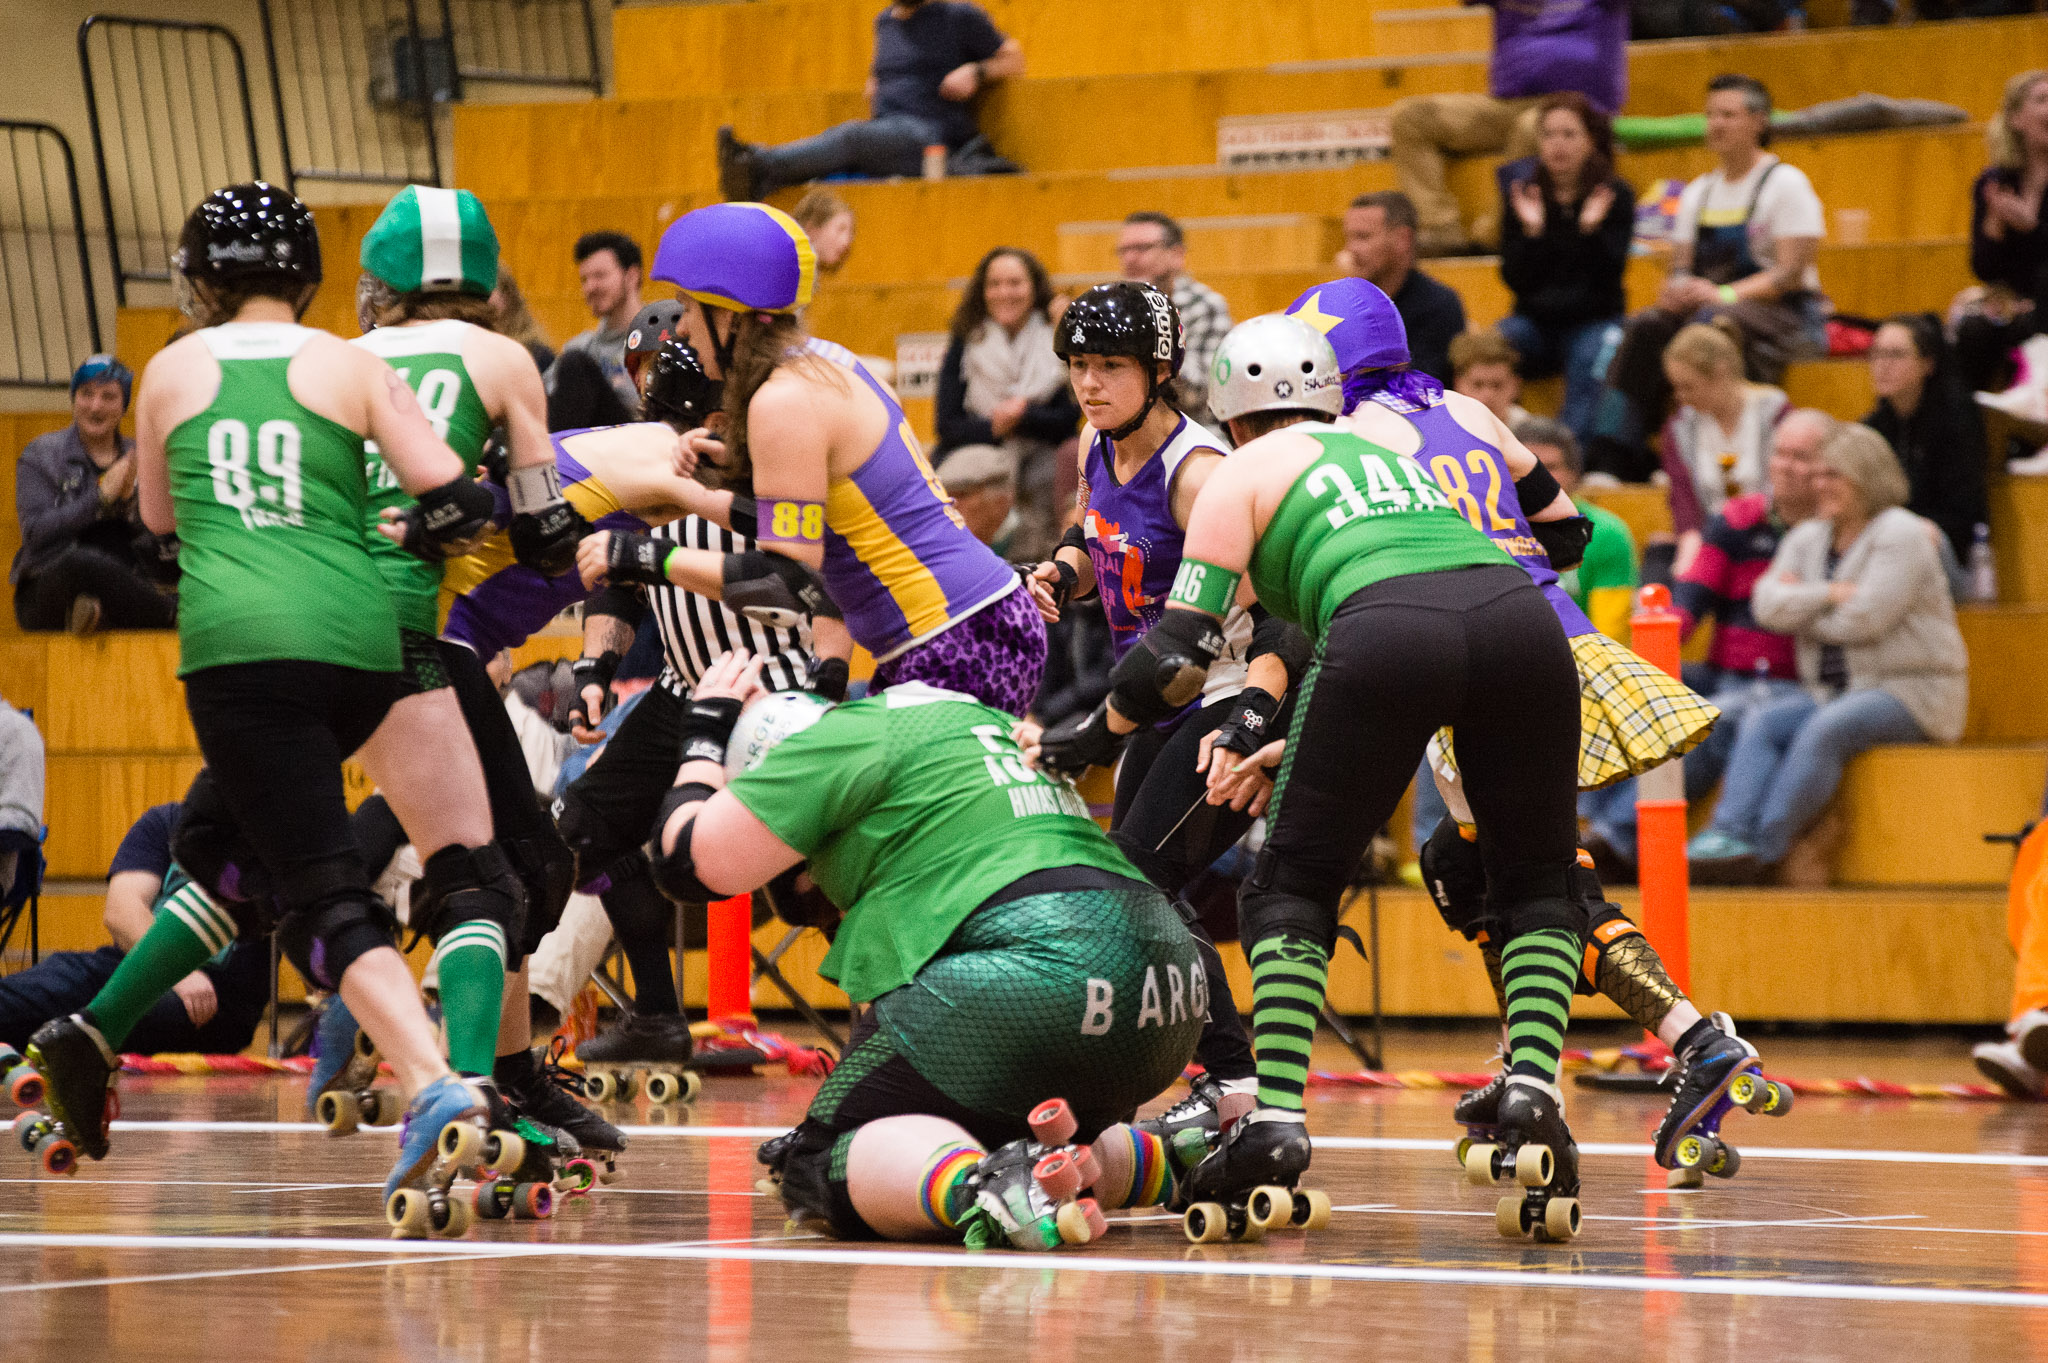 CRDL - Brindabelters v Surly Griffin. Photographer: Brett Sargeant, D-eye Photography